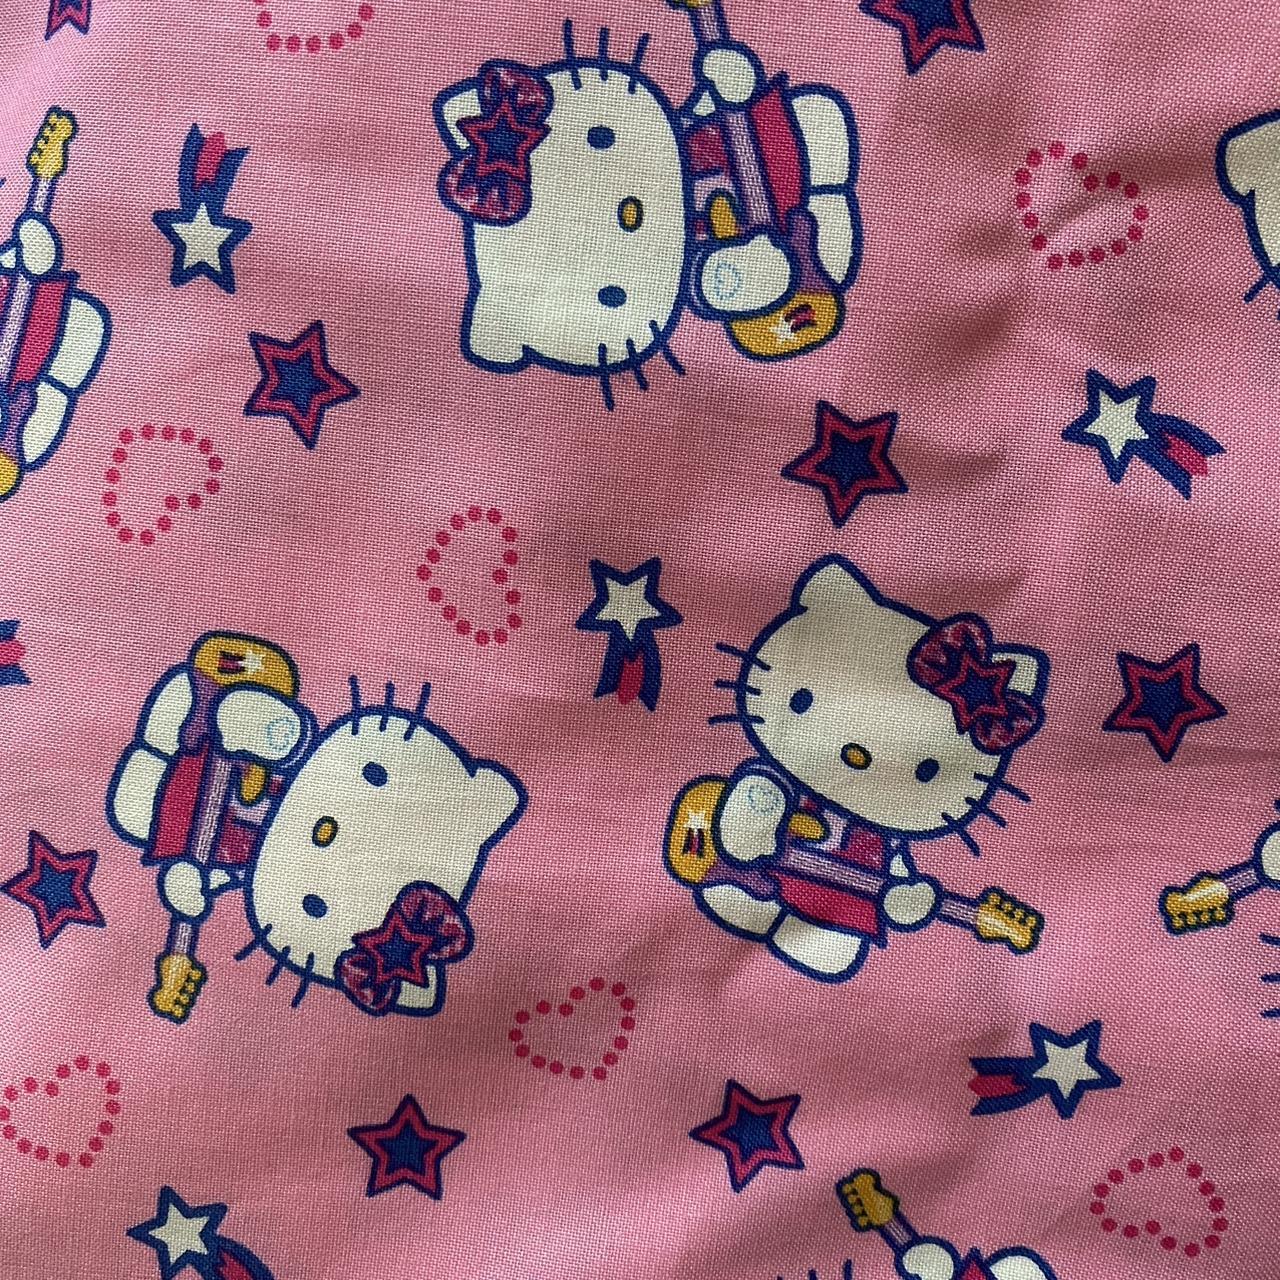 Sanrio Pink and White Collectibles | Depop